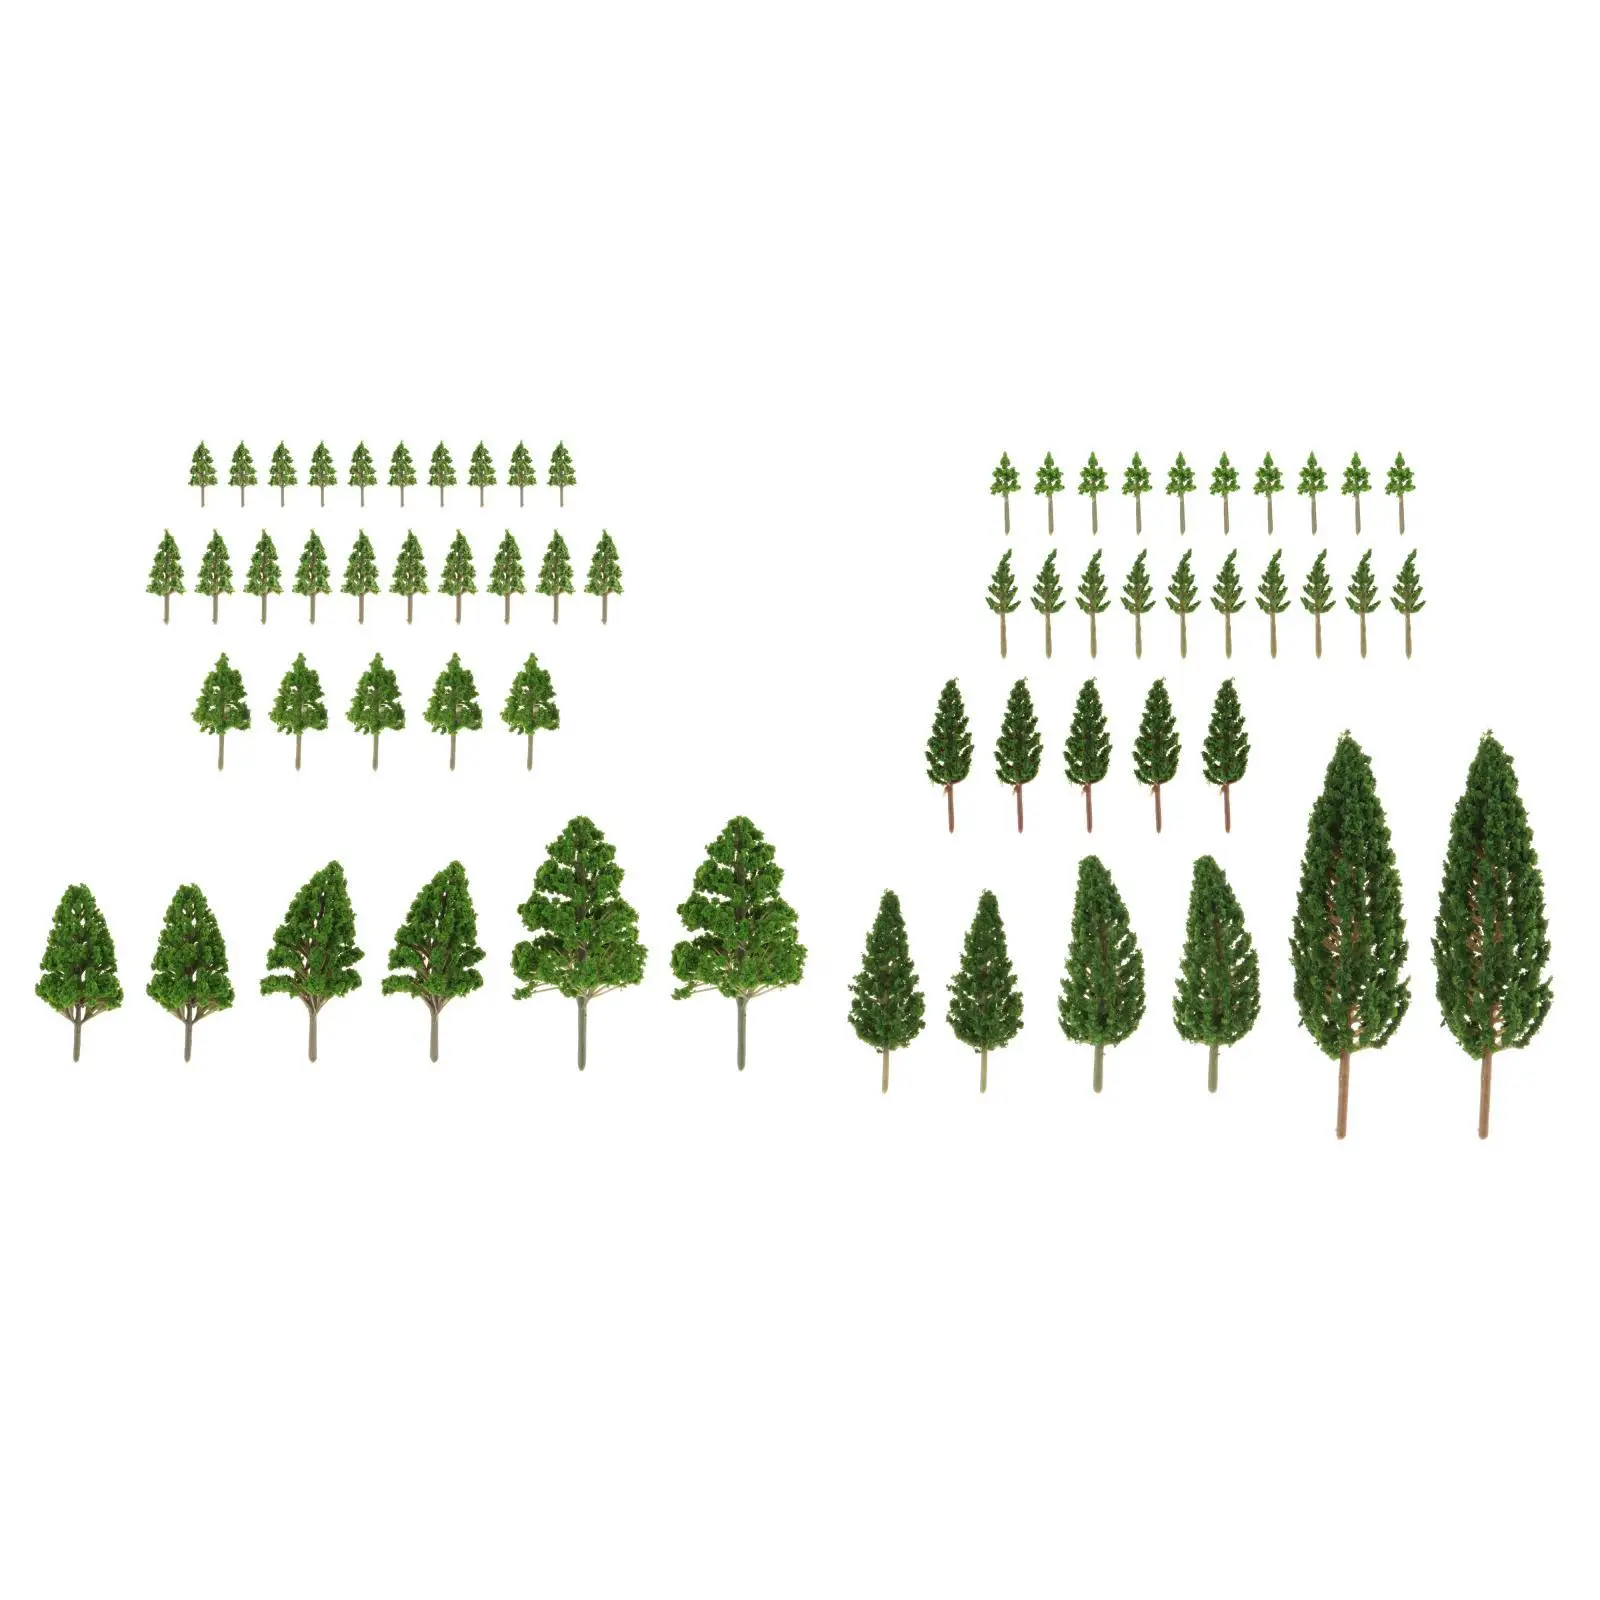 62x Simulation Miniature Tree Miniature Trees Model for Miniature Scenery Building Model Diorama Layout Sand Table DIY Crafts